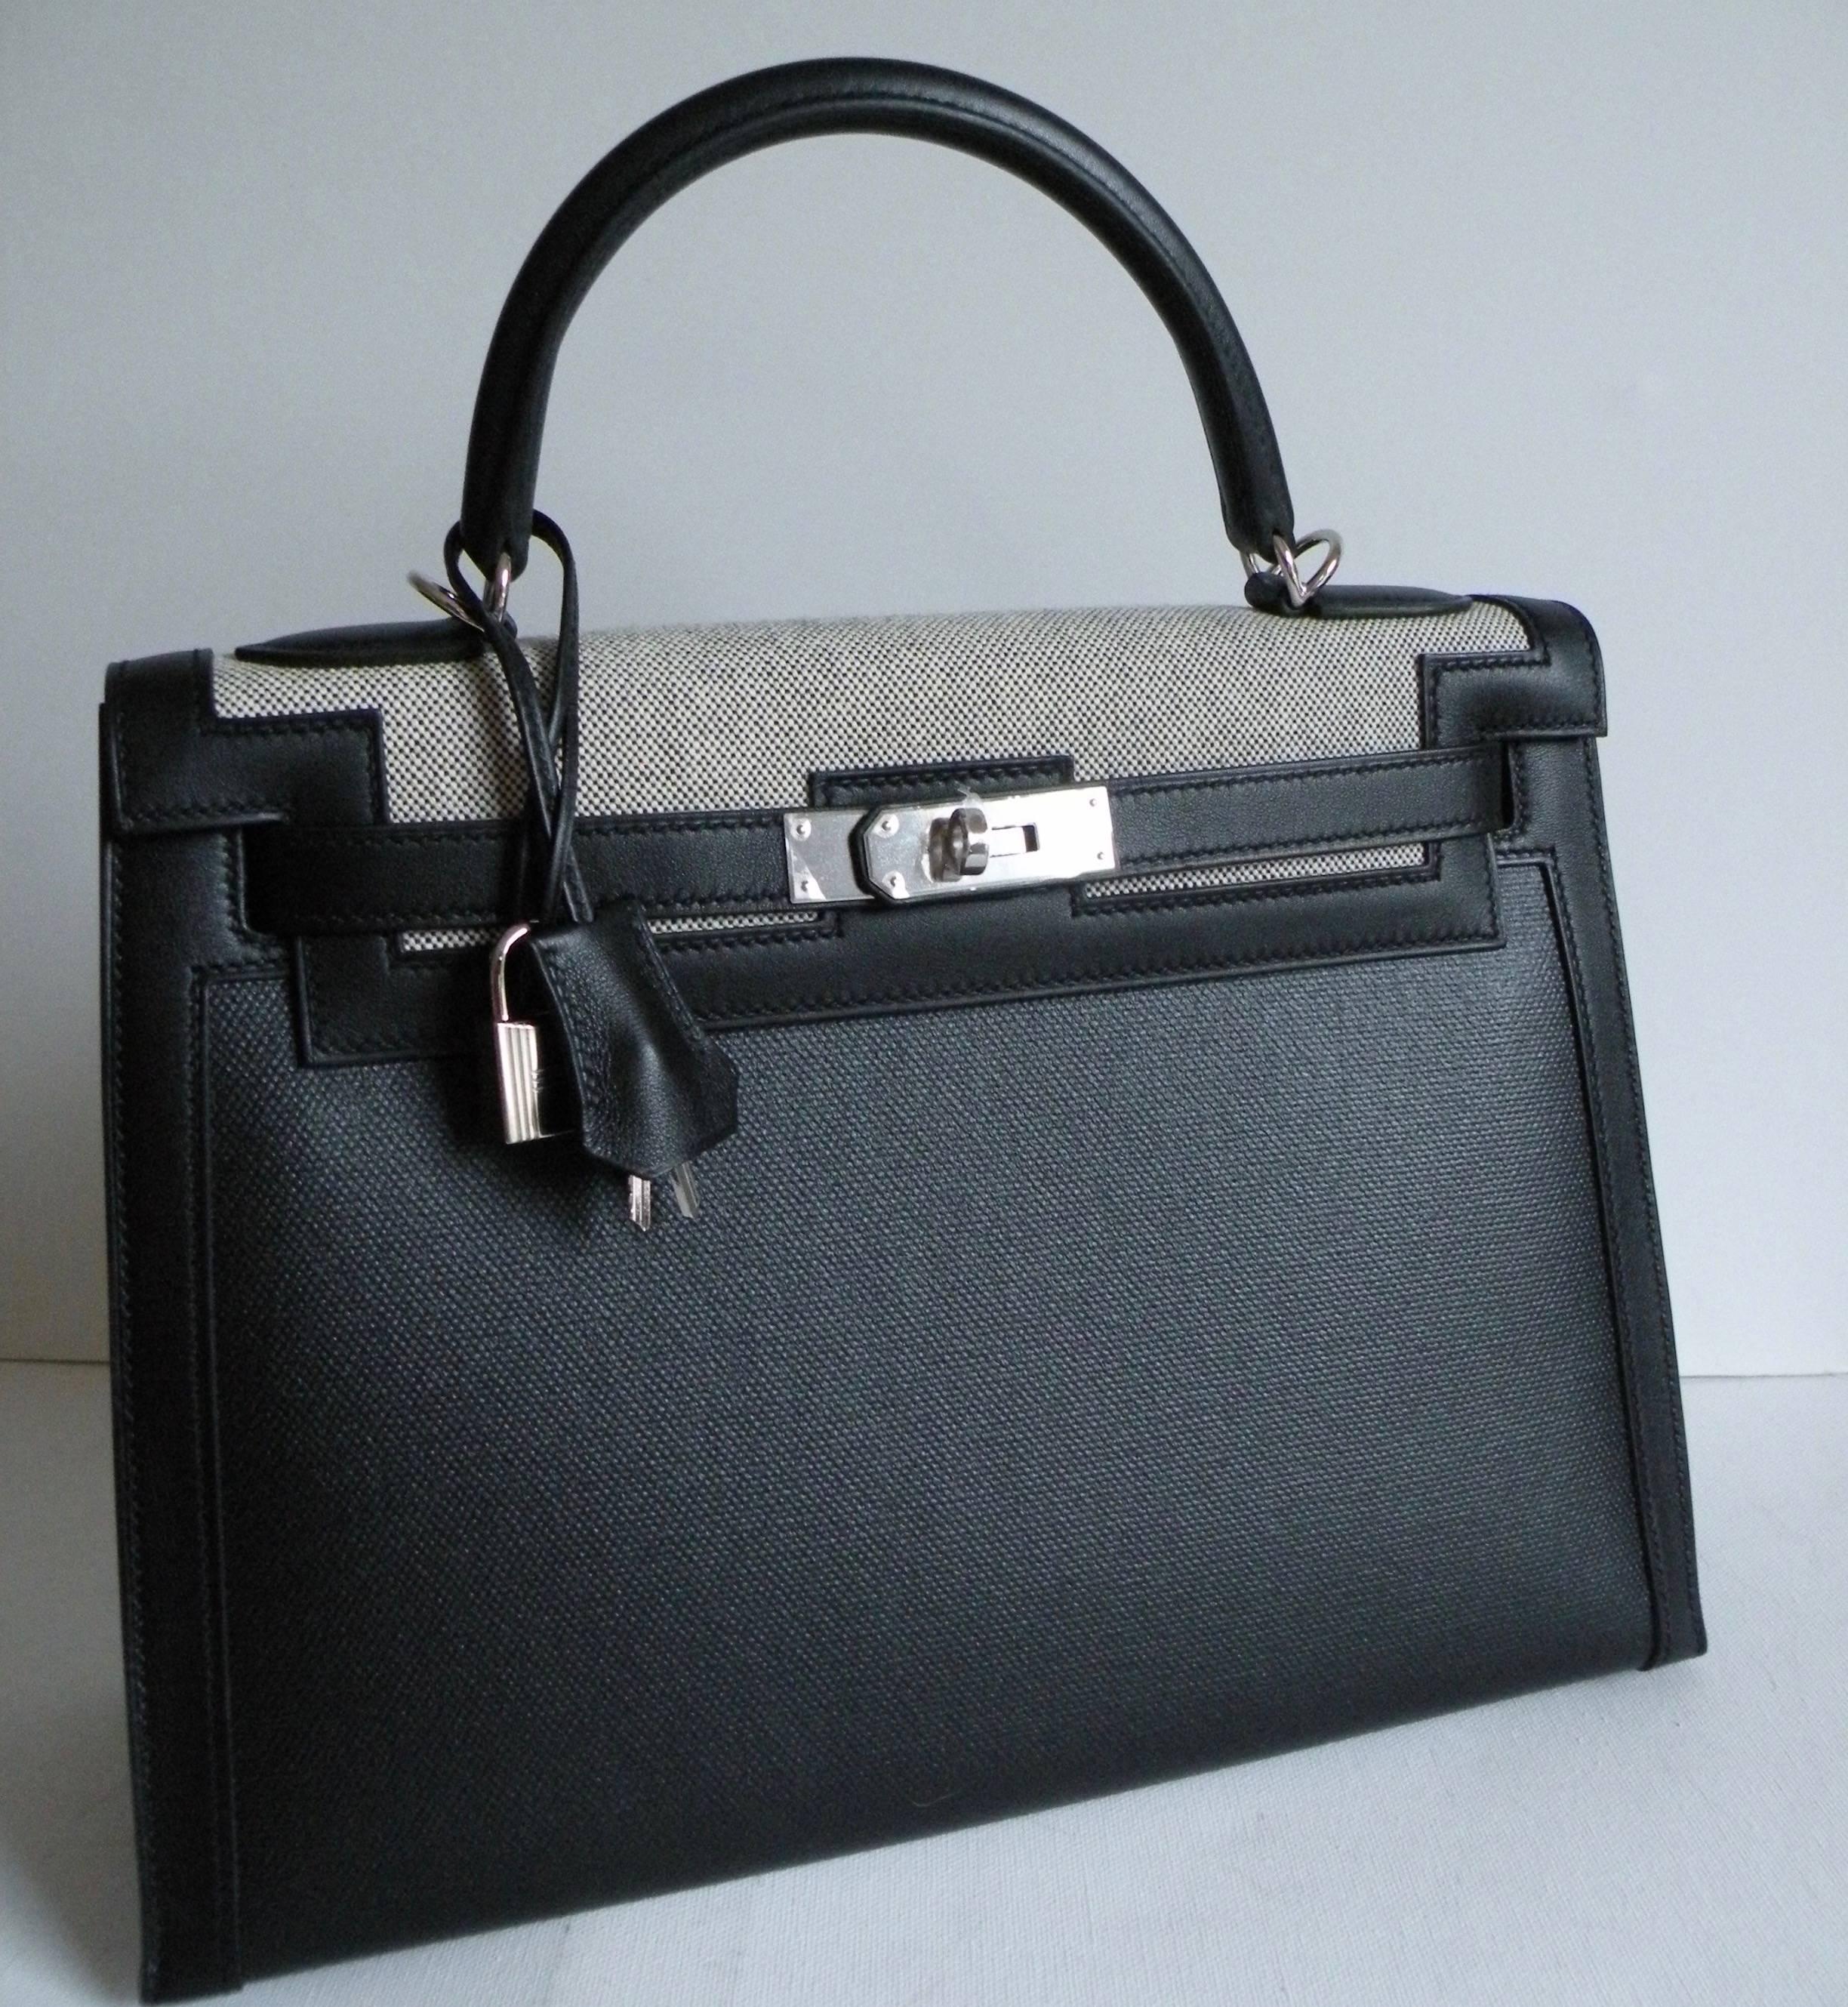 Hermes Kelly Sellier Bag 32CM Limited Edition Black Criss Etoile Toile w  Pocket 2